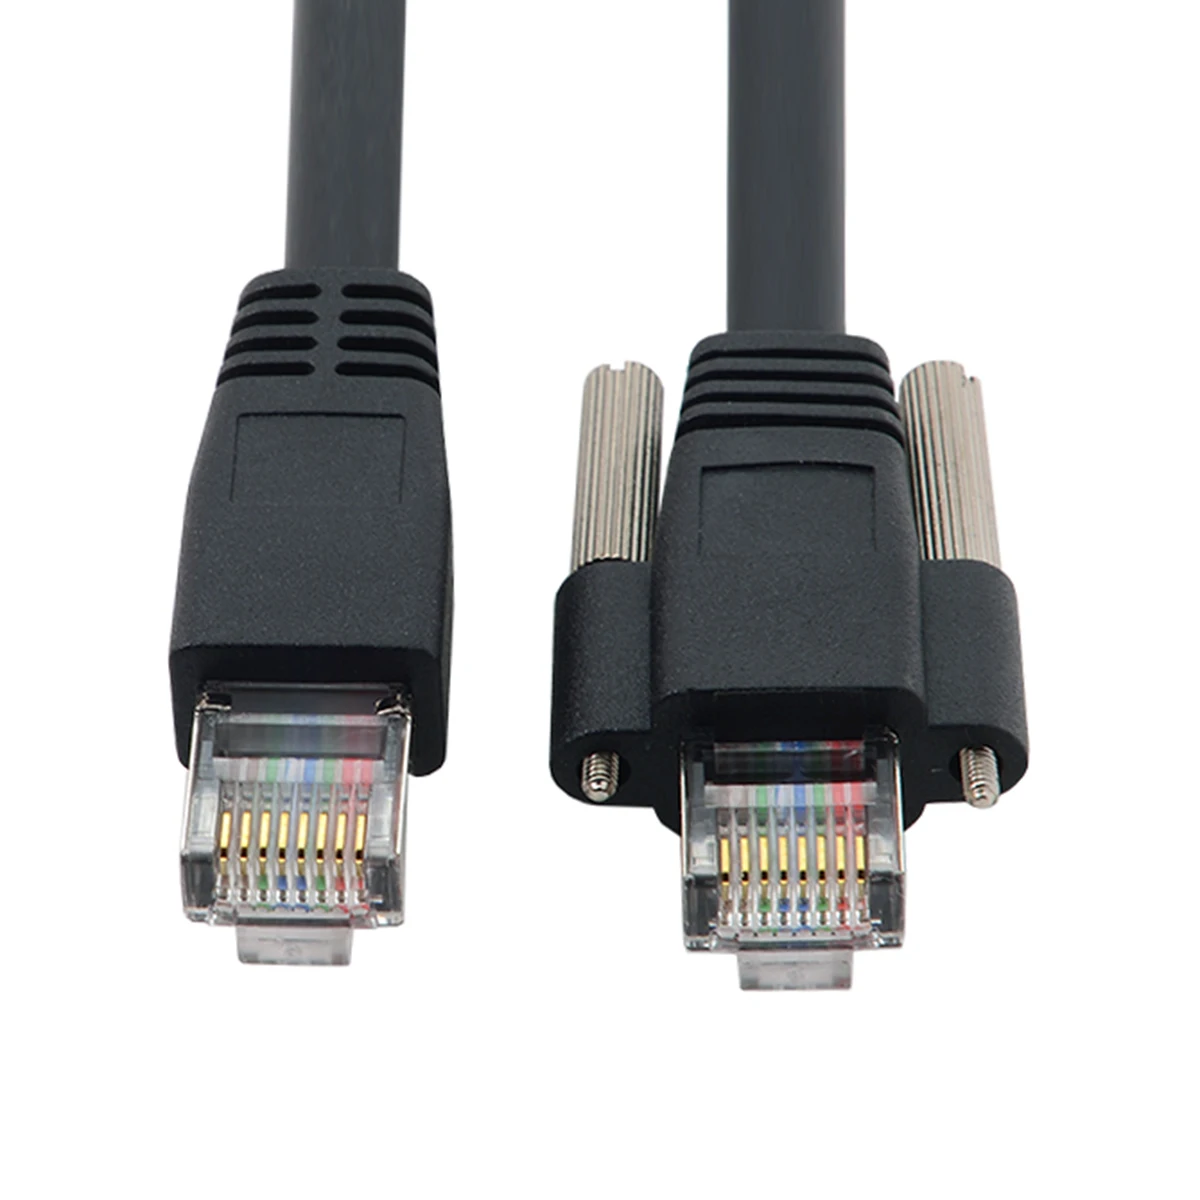 Up Angled Cablecc RJ45 Vision Flexible Patch Cable Wear Resisting Screw Lock Cat6 for GigE CCD Data-High Flex Tray 